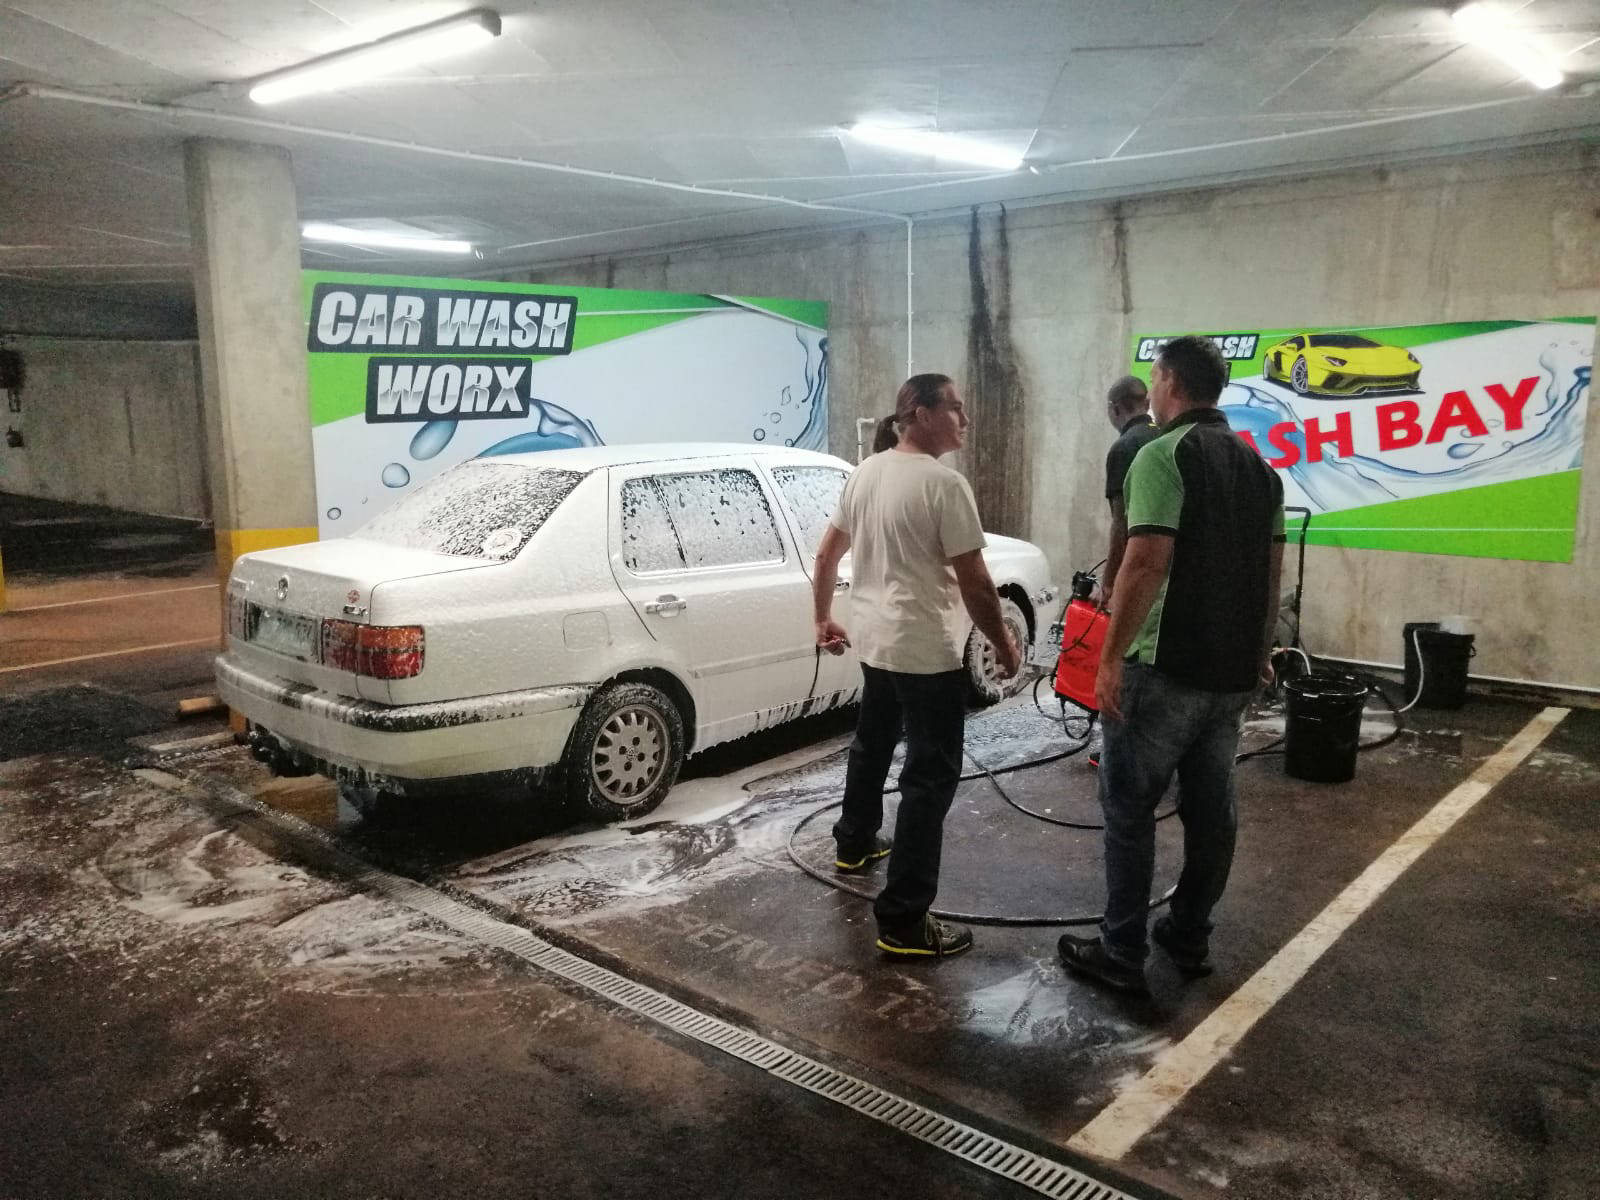 CarWash Worx Durban Christians Village Branch, Car Wash Franchises Available, CarWash Worx Head Office, Join The Leading Car Wash Franchising Group, Start Your Own Successful Car Wash Business Now